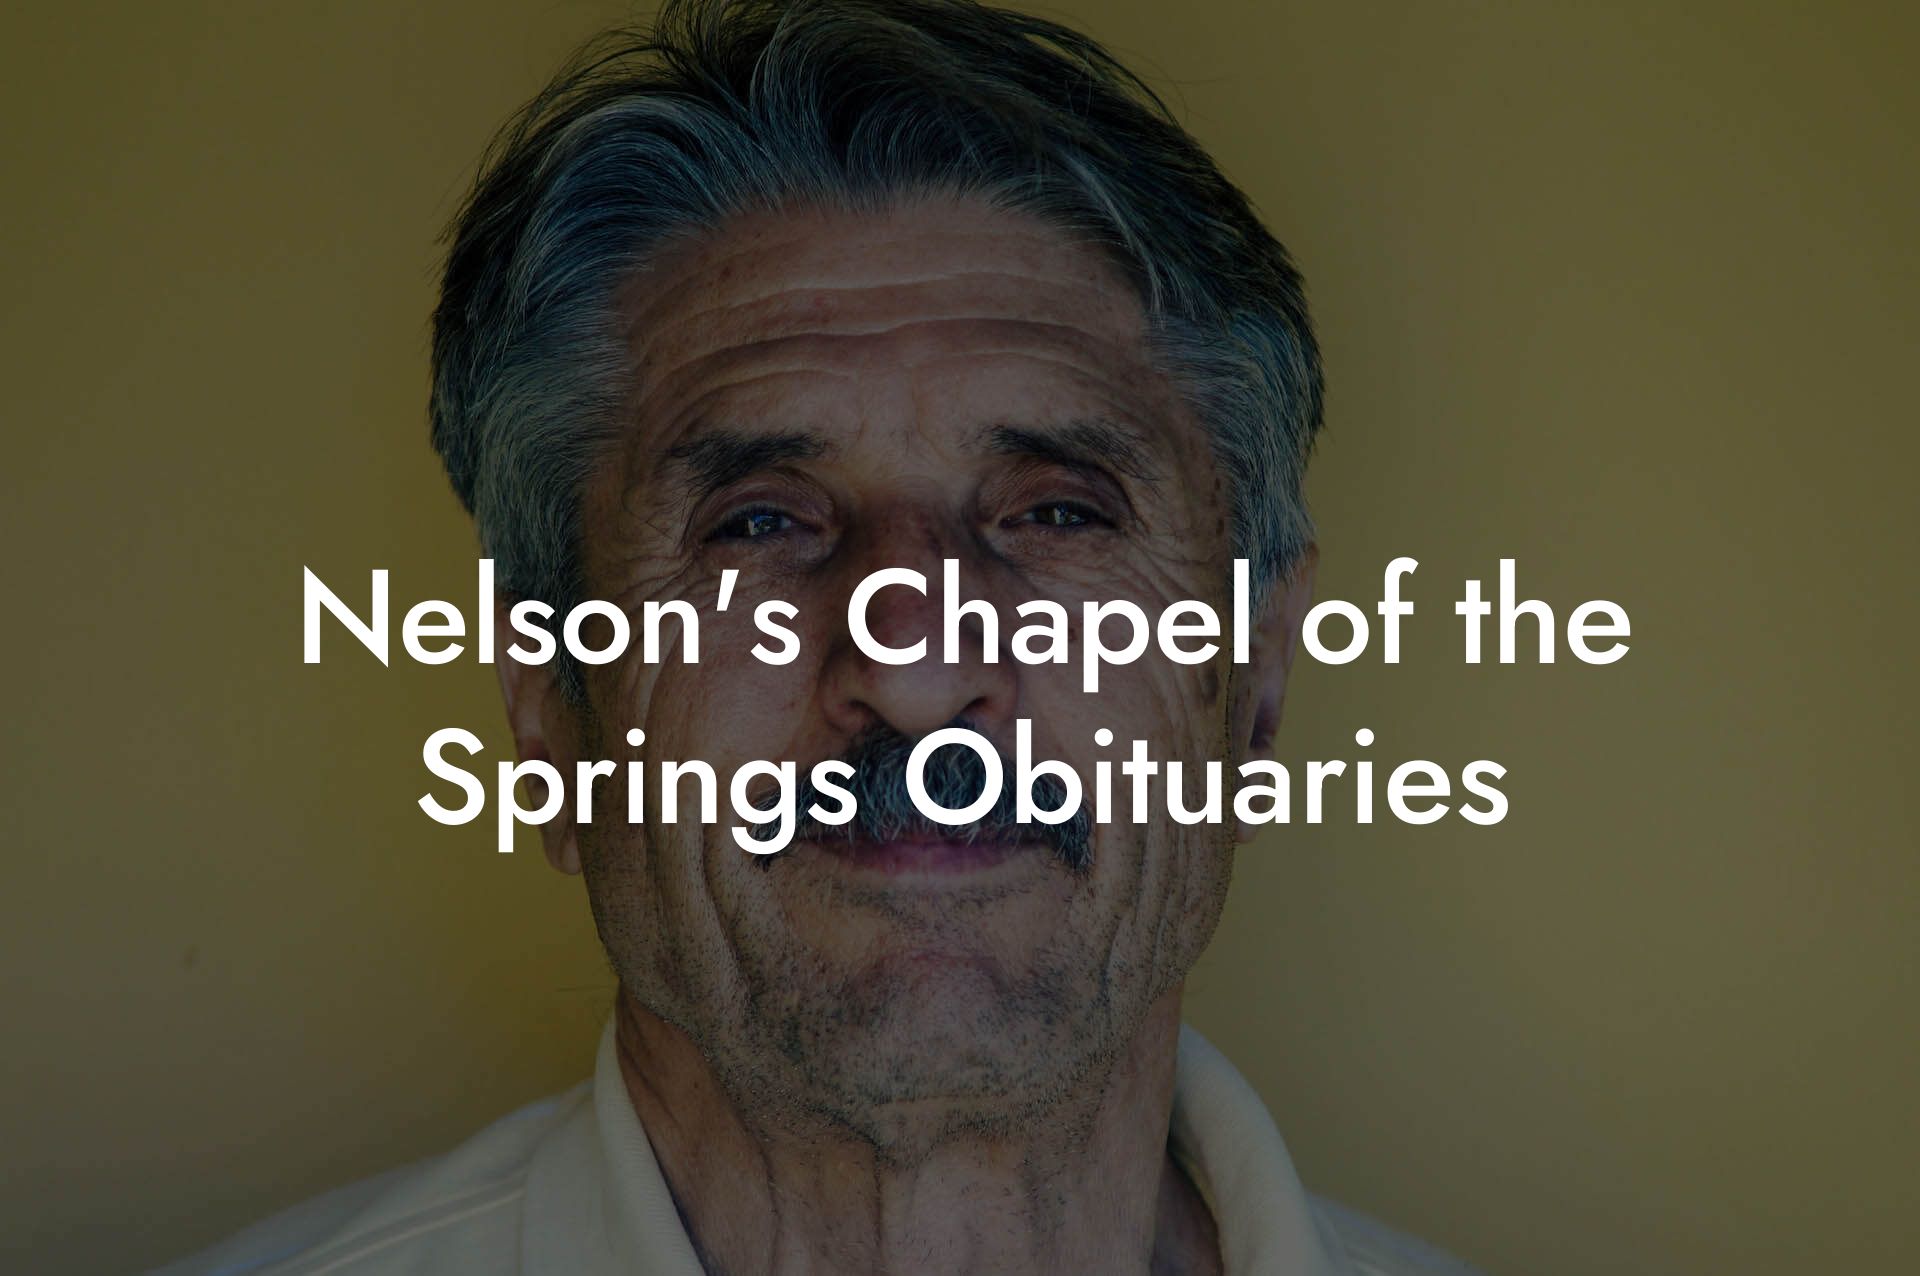 Nelson's Chapel of the Springs Obituaries